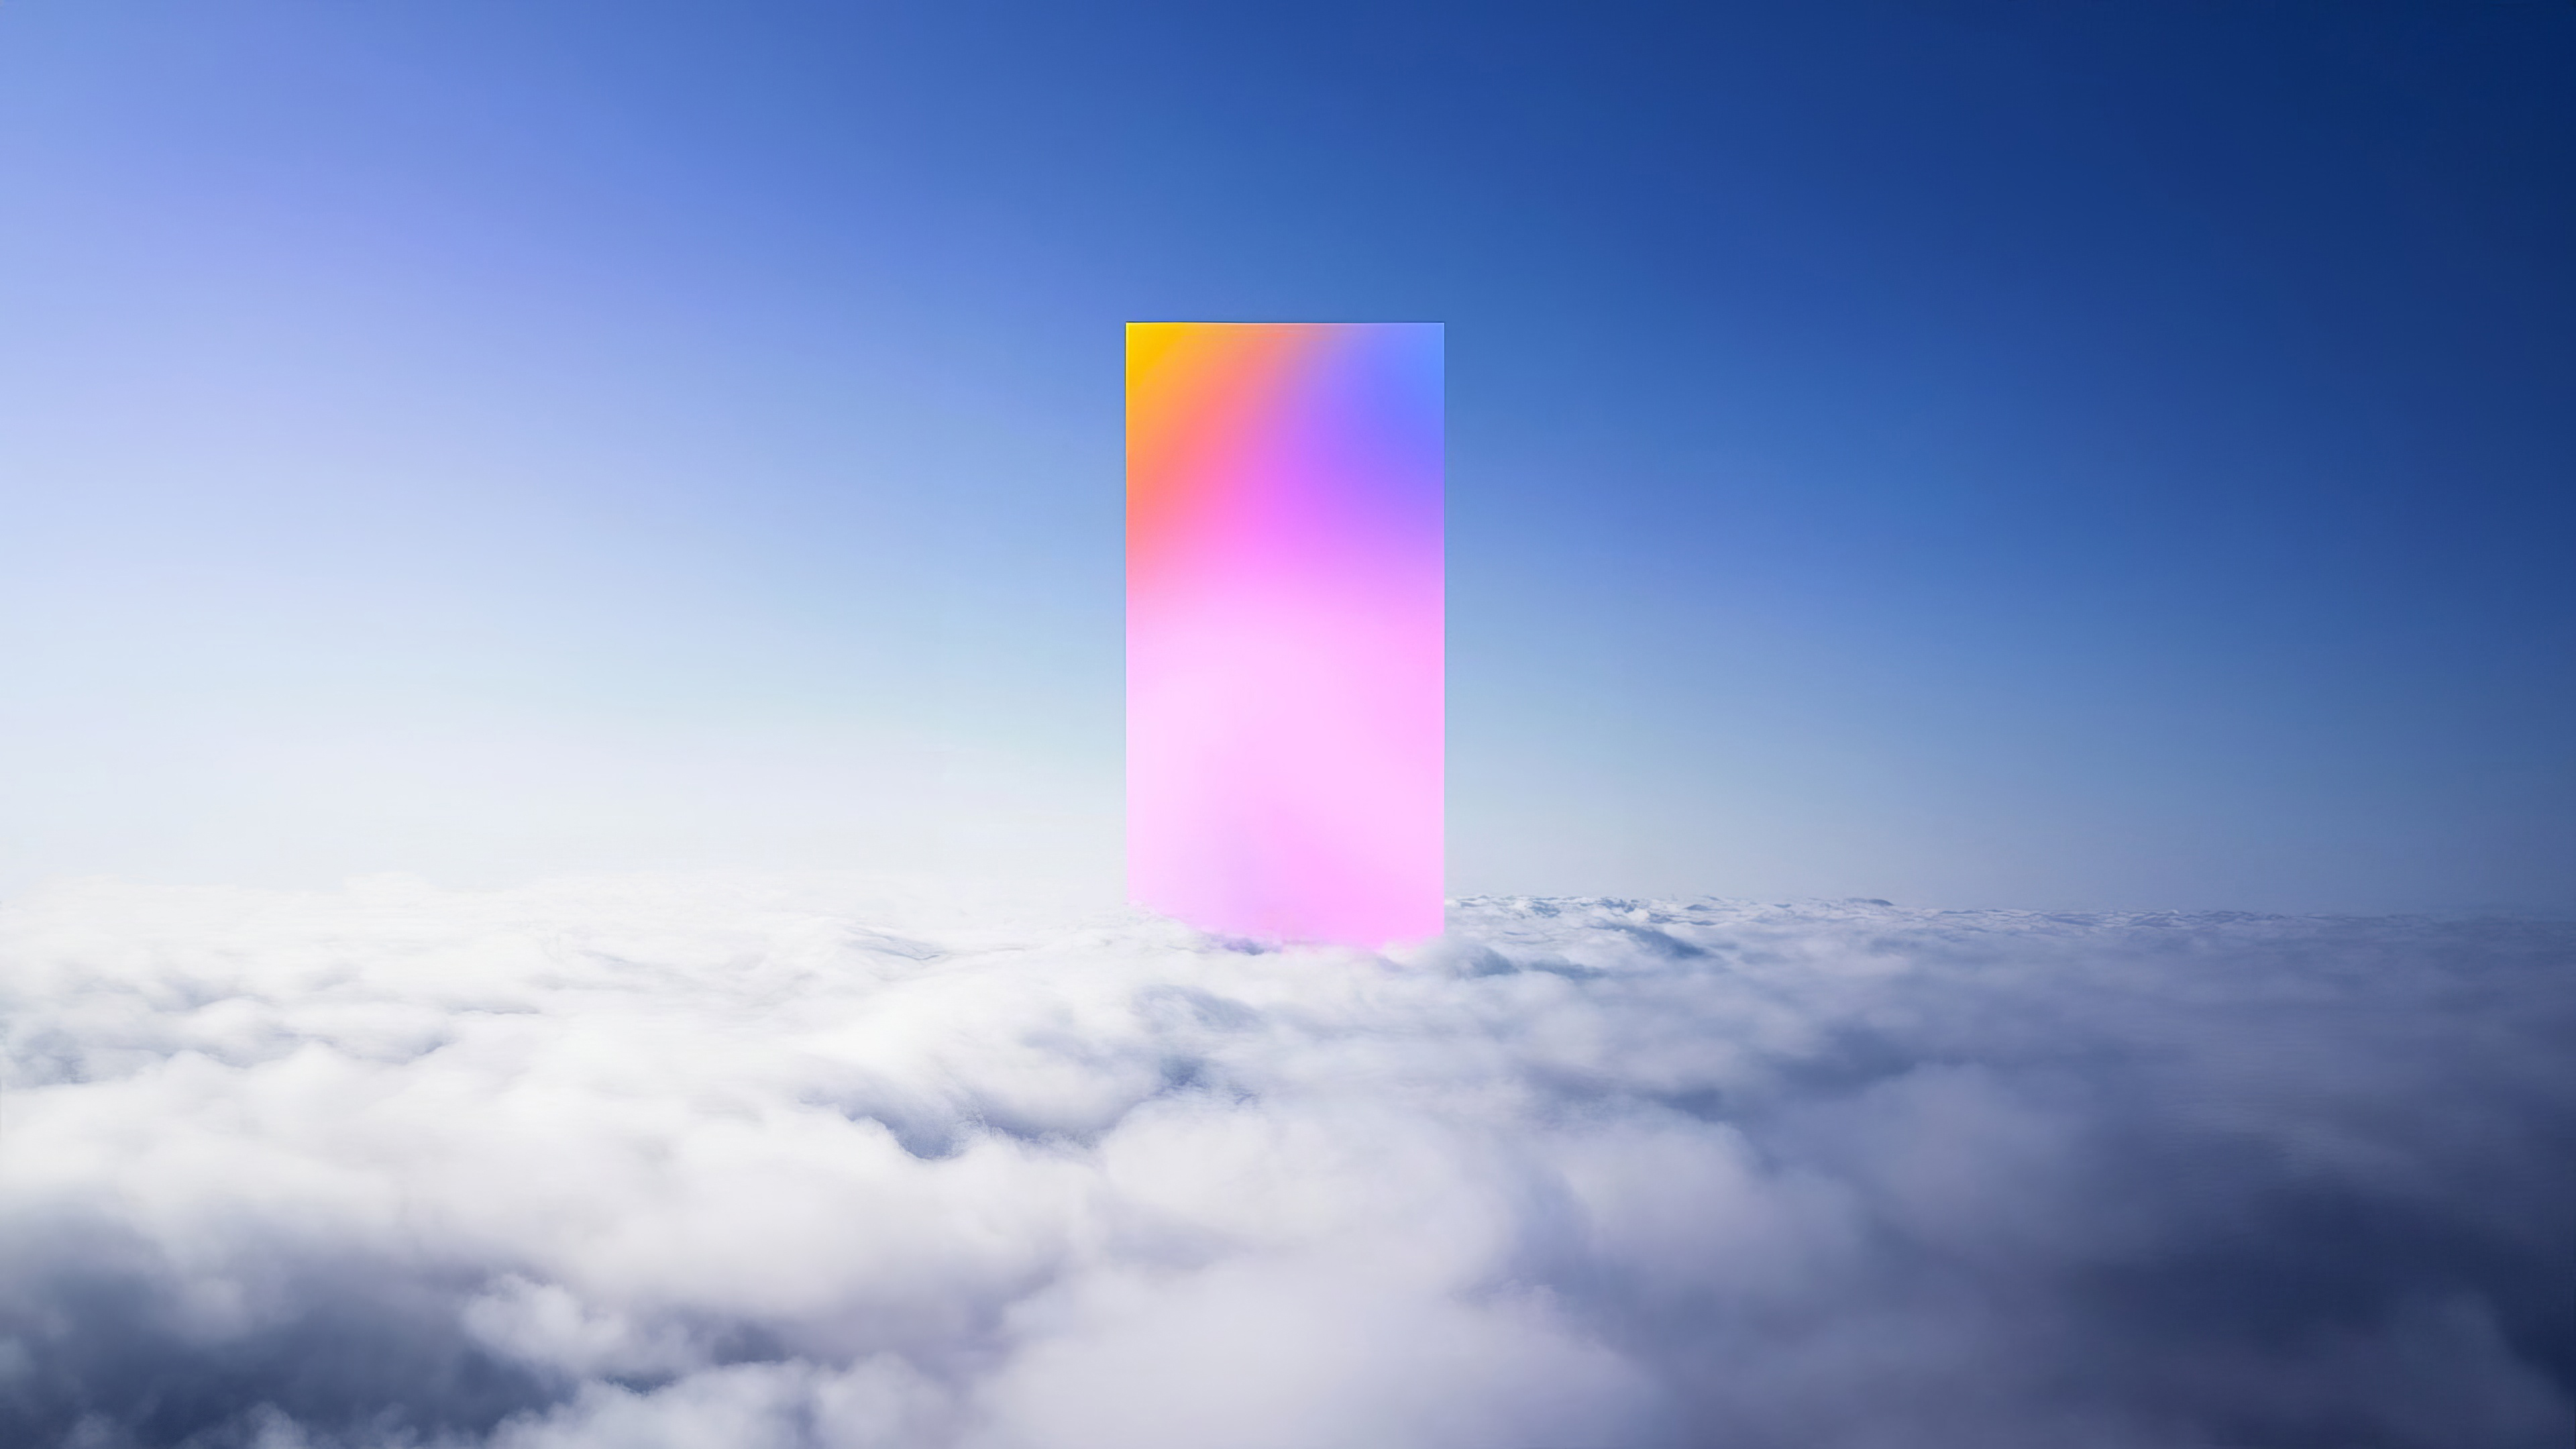 General 3840x2160 digital art photography clouds minimalism abstract door 4K sky simple background